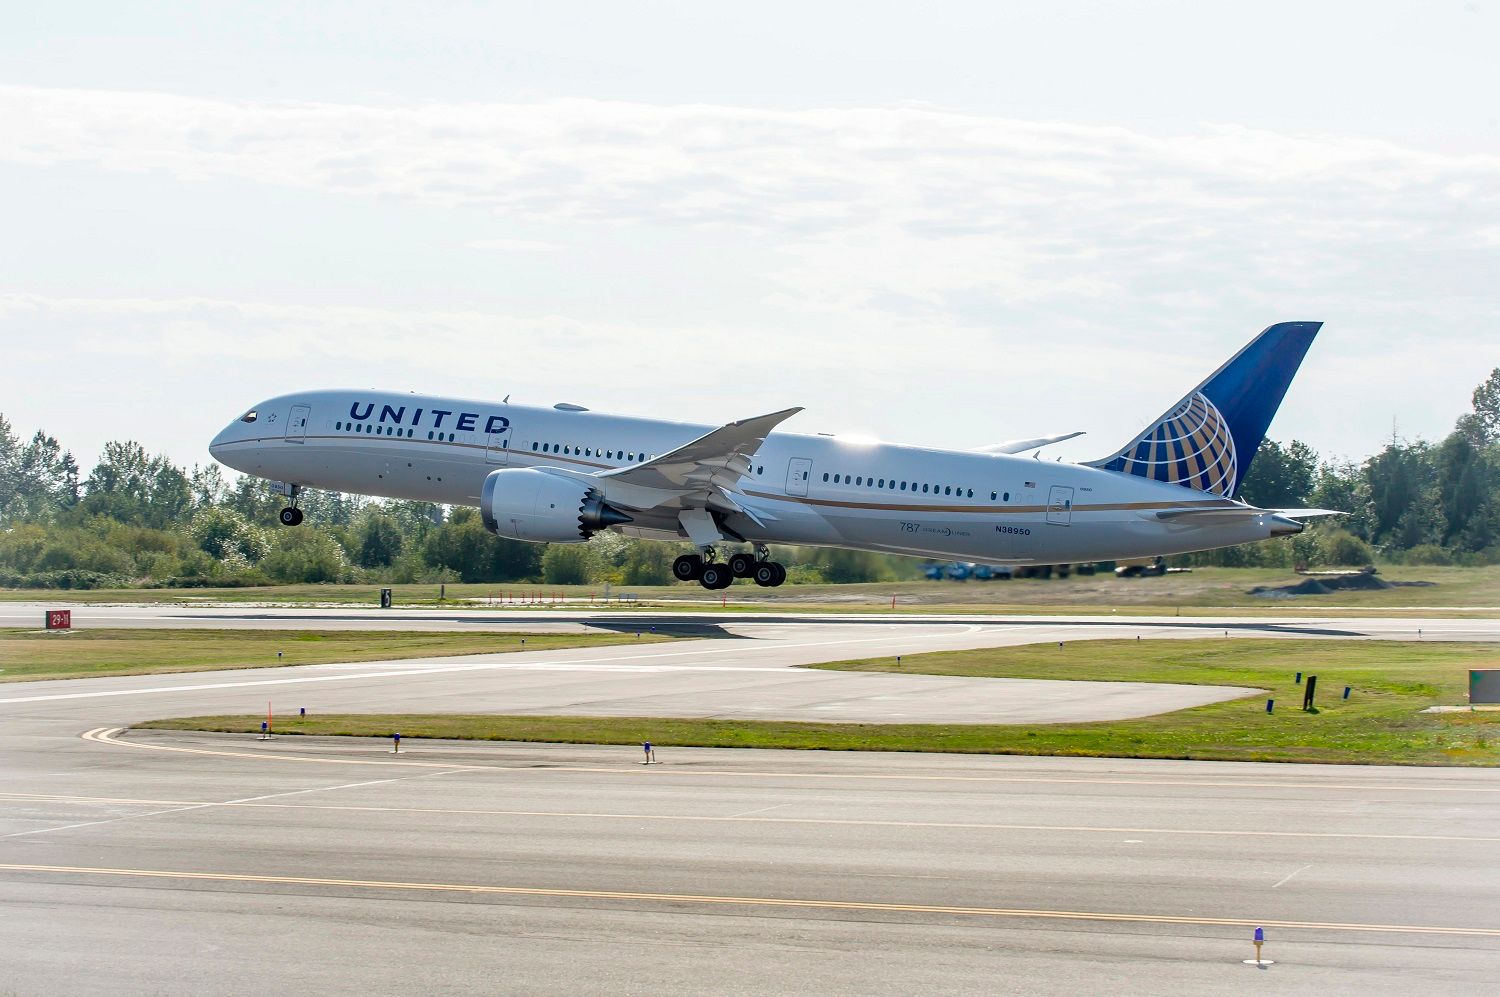 A United Airlines Boeing 787 taking off.